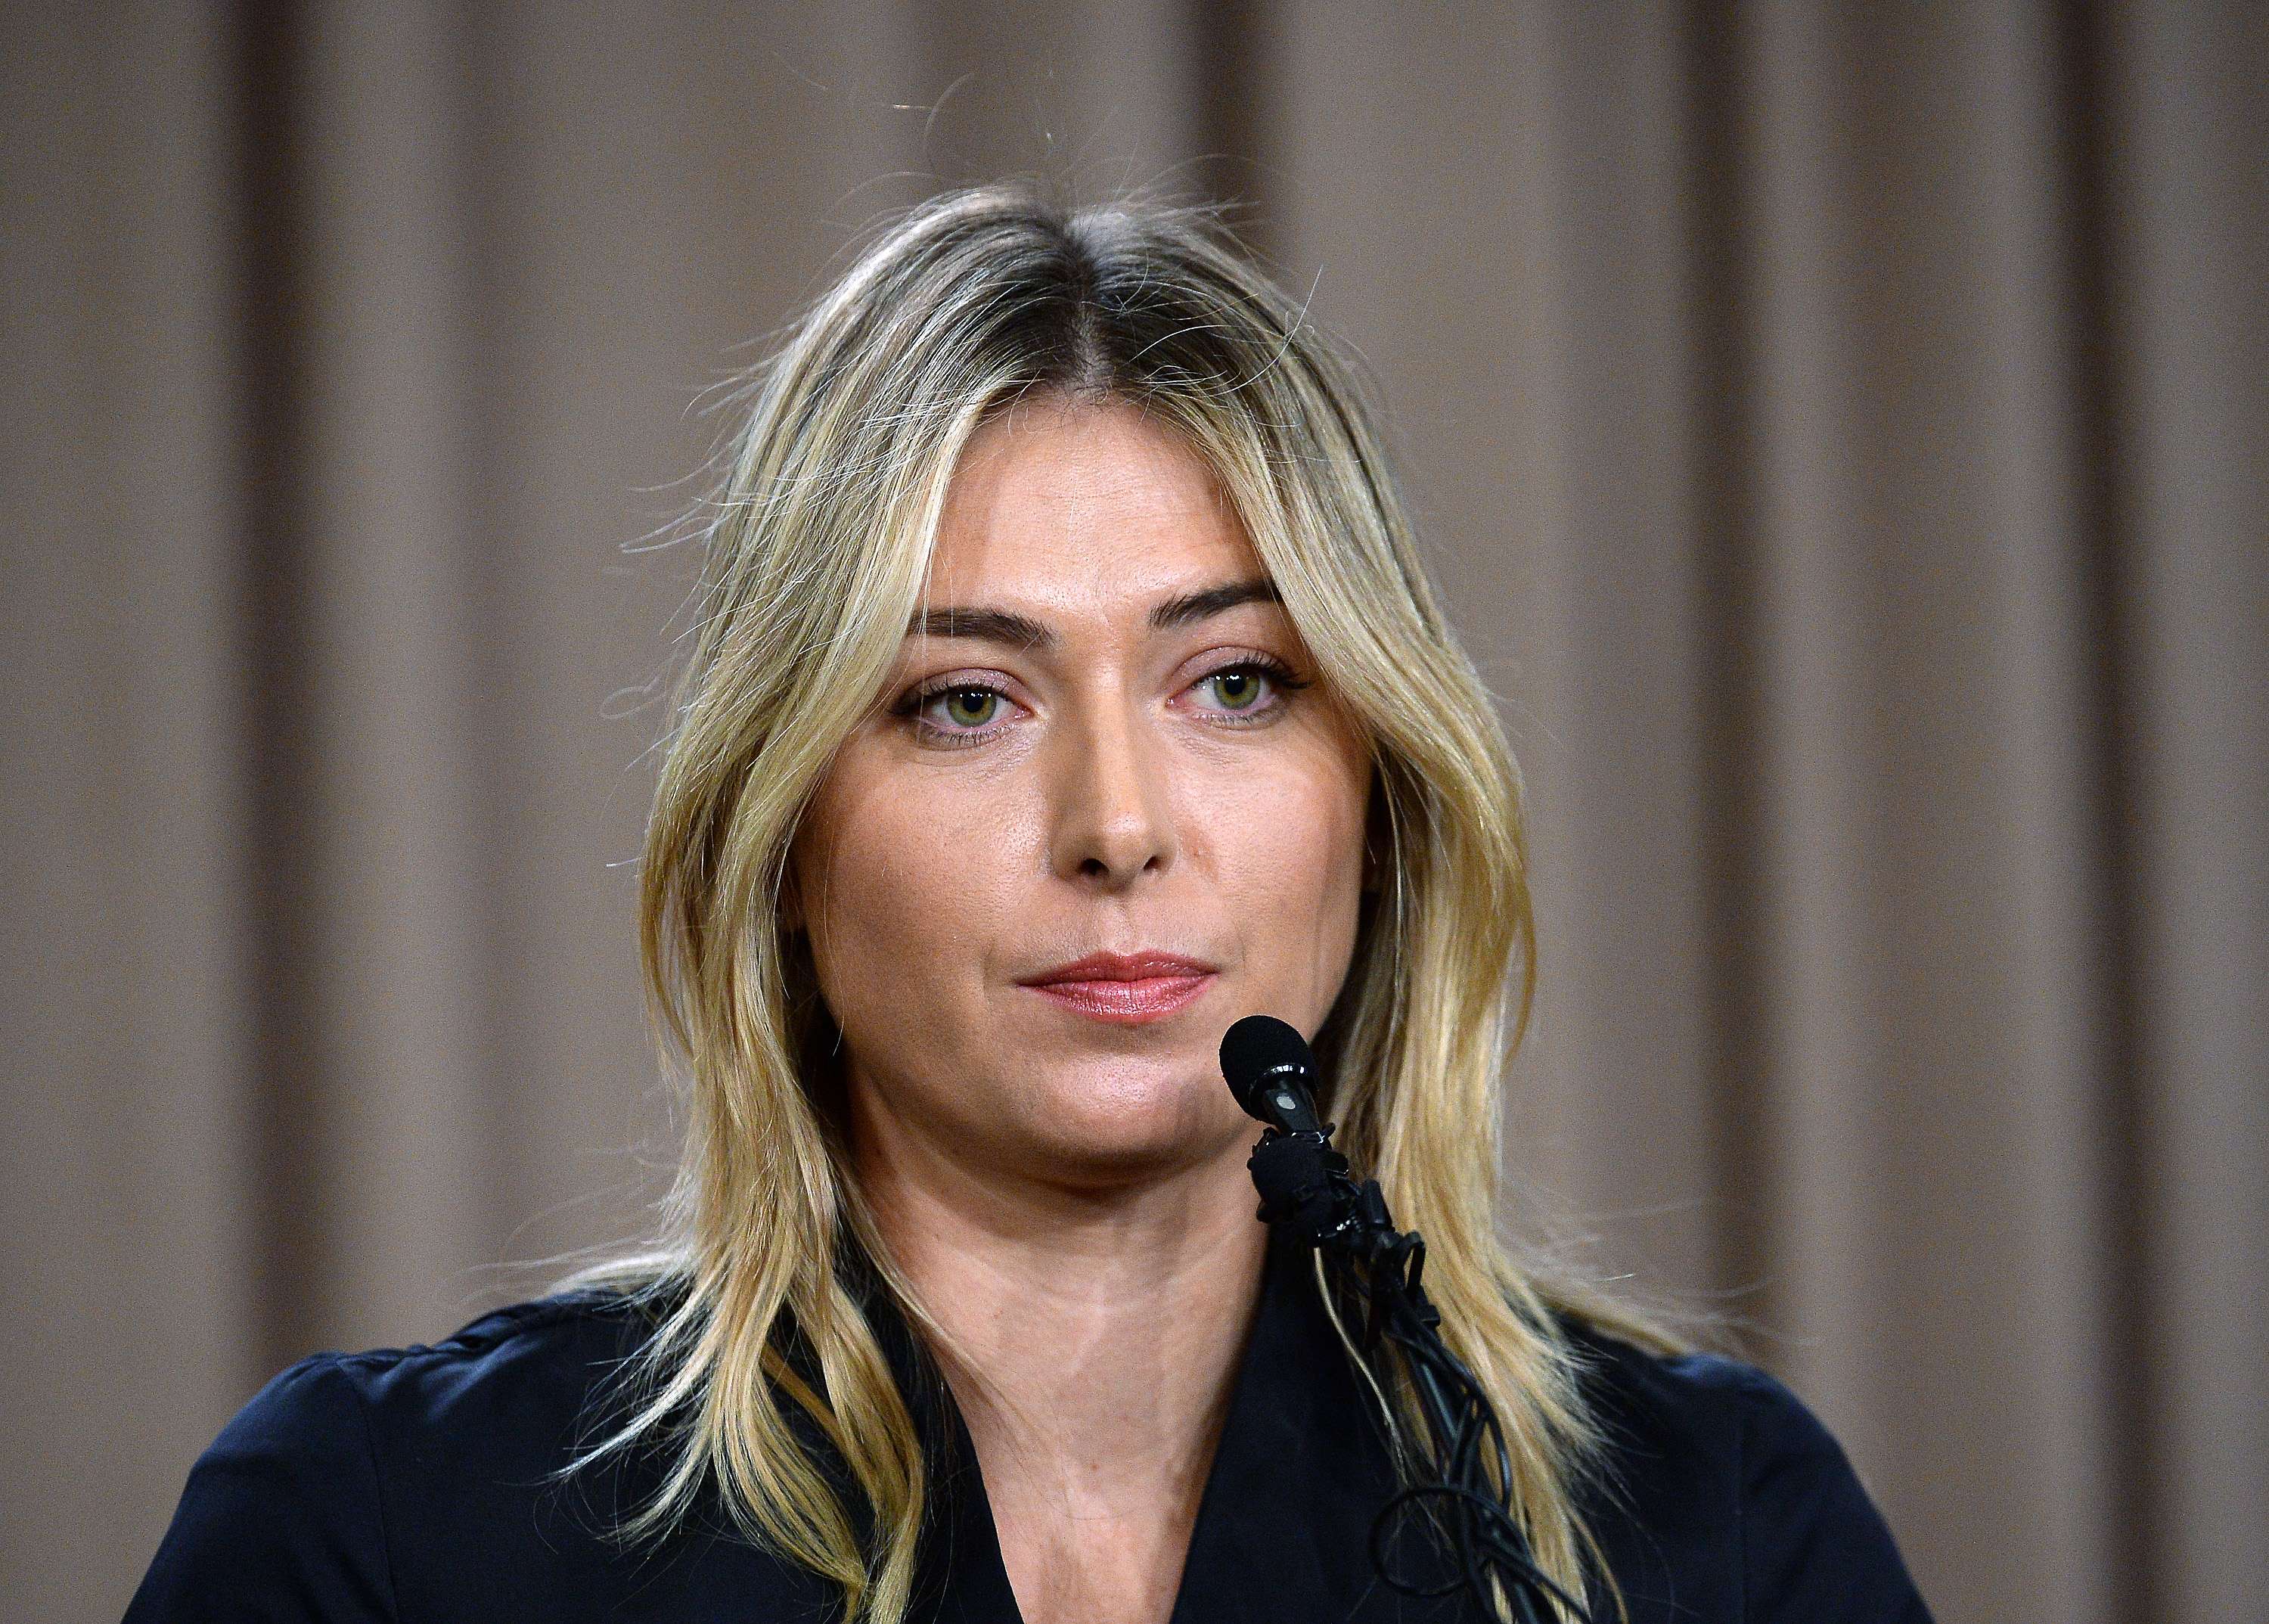 Experts perplexed over why Sharapova was taking banned heart drug